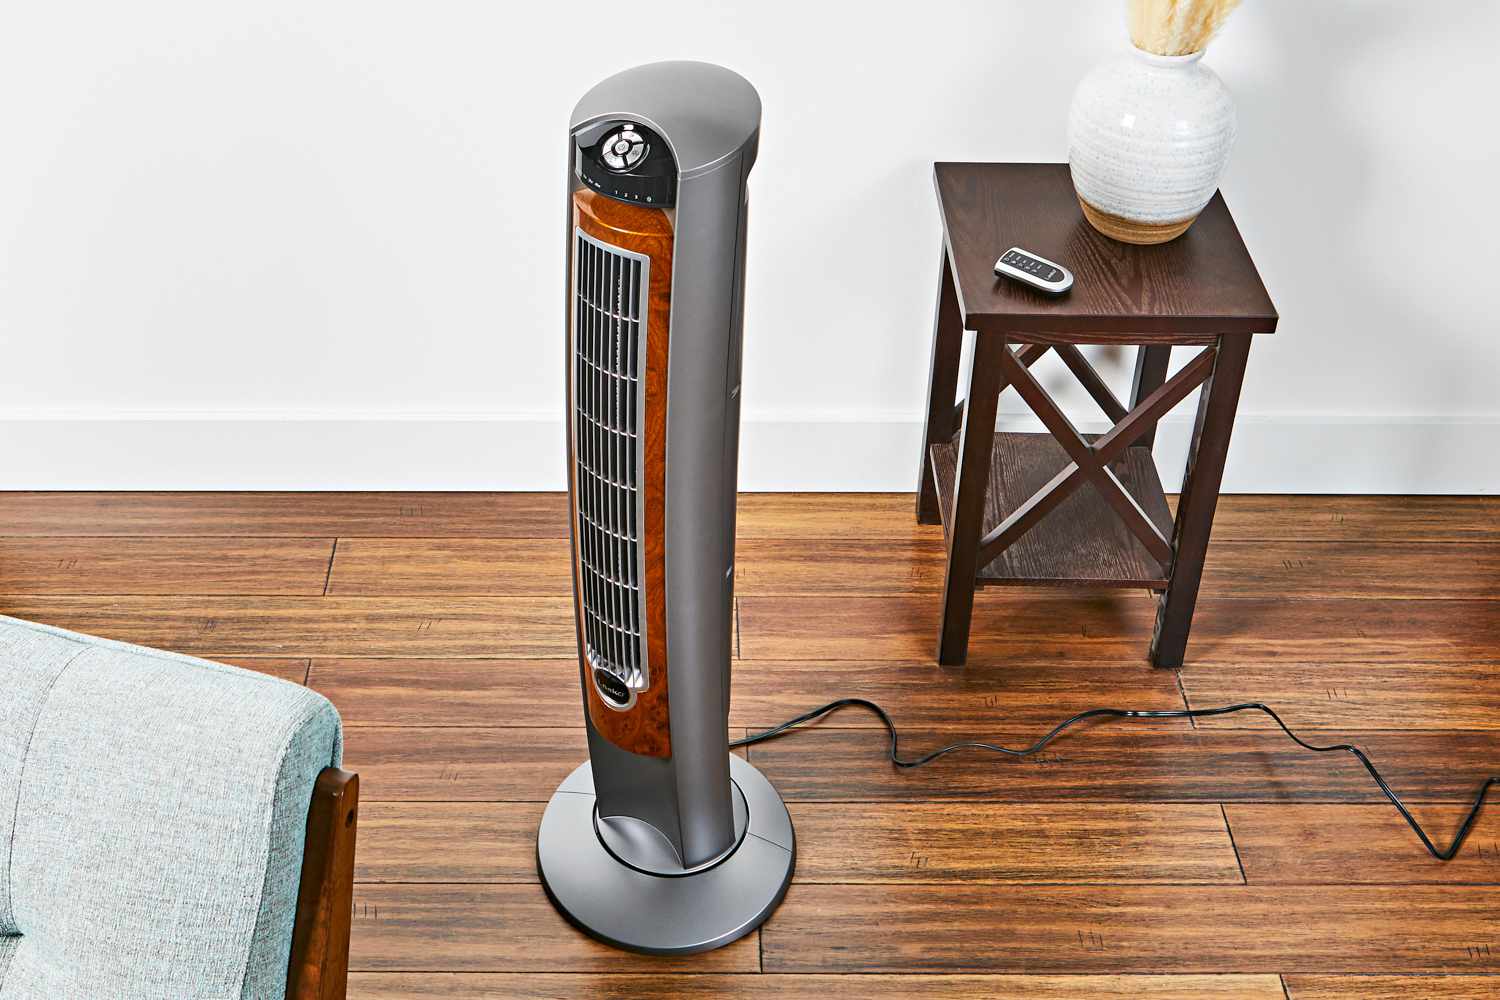 Lasko 42" Oscillating Tower Fan near a side table and chair